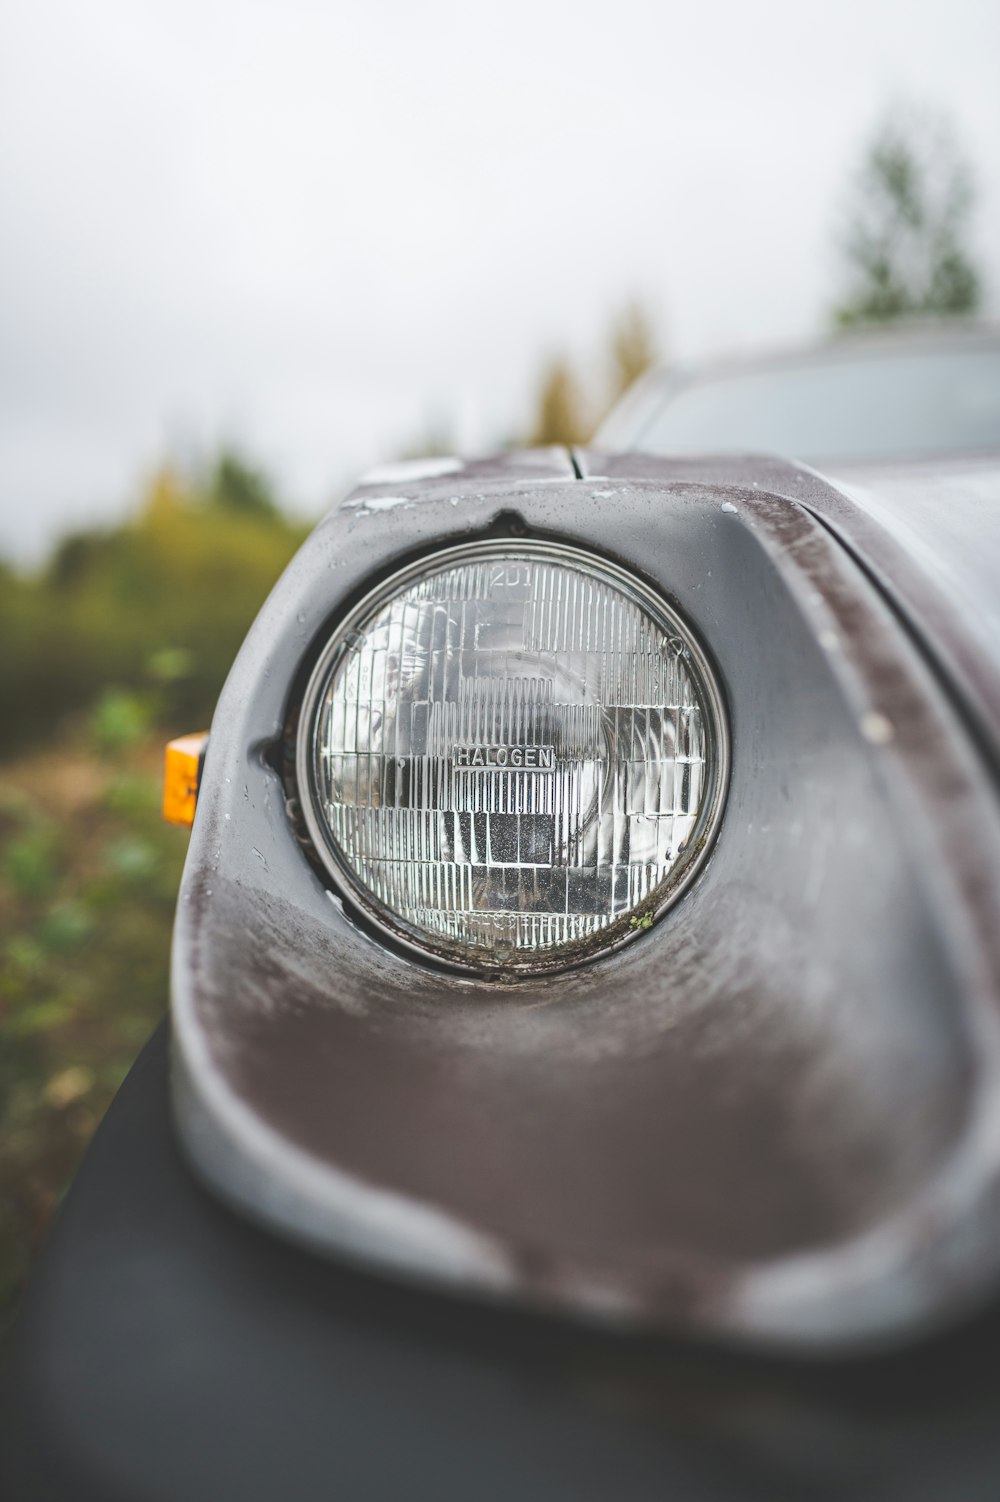 a close up of a car headlight with trees in the background